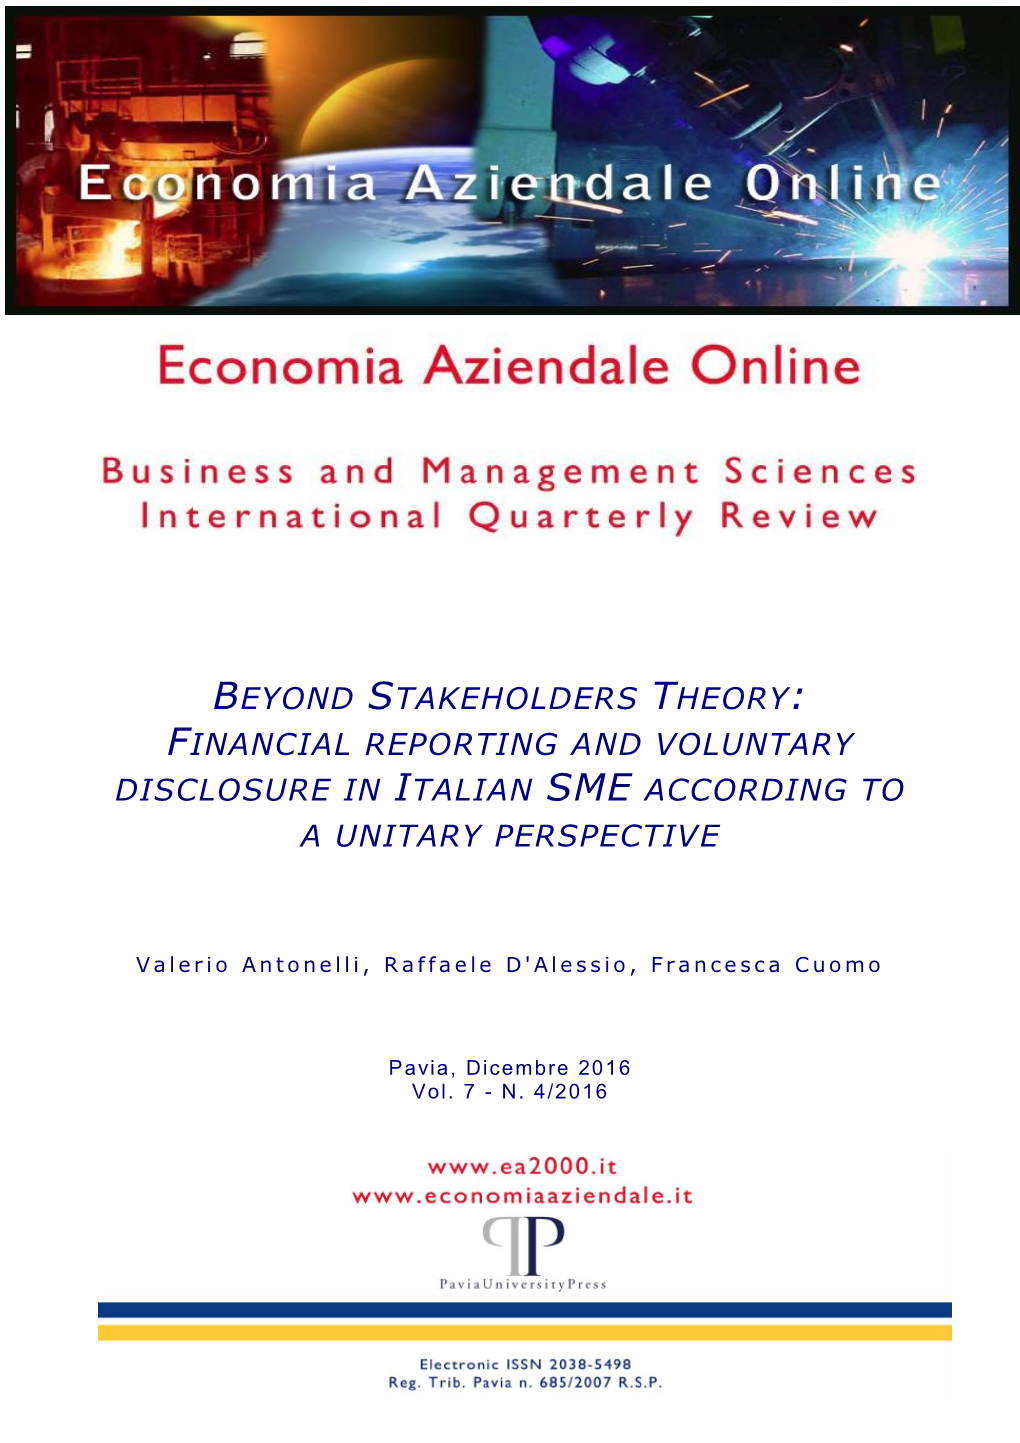 Beyond Stakeholders Theory: Financial Reporting and Voluntary Disclosure in Italian Sme According to a Unitary Perspective